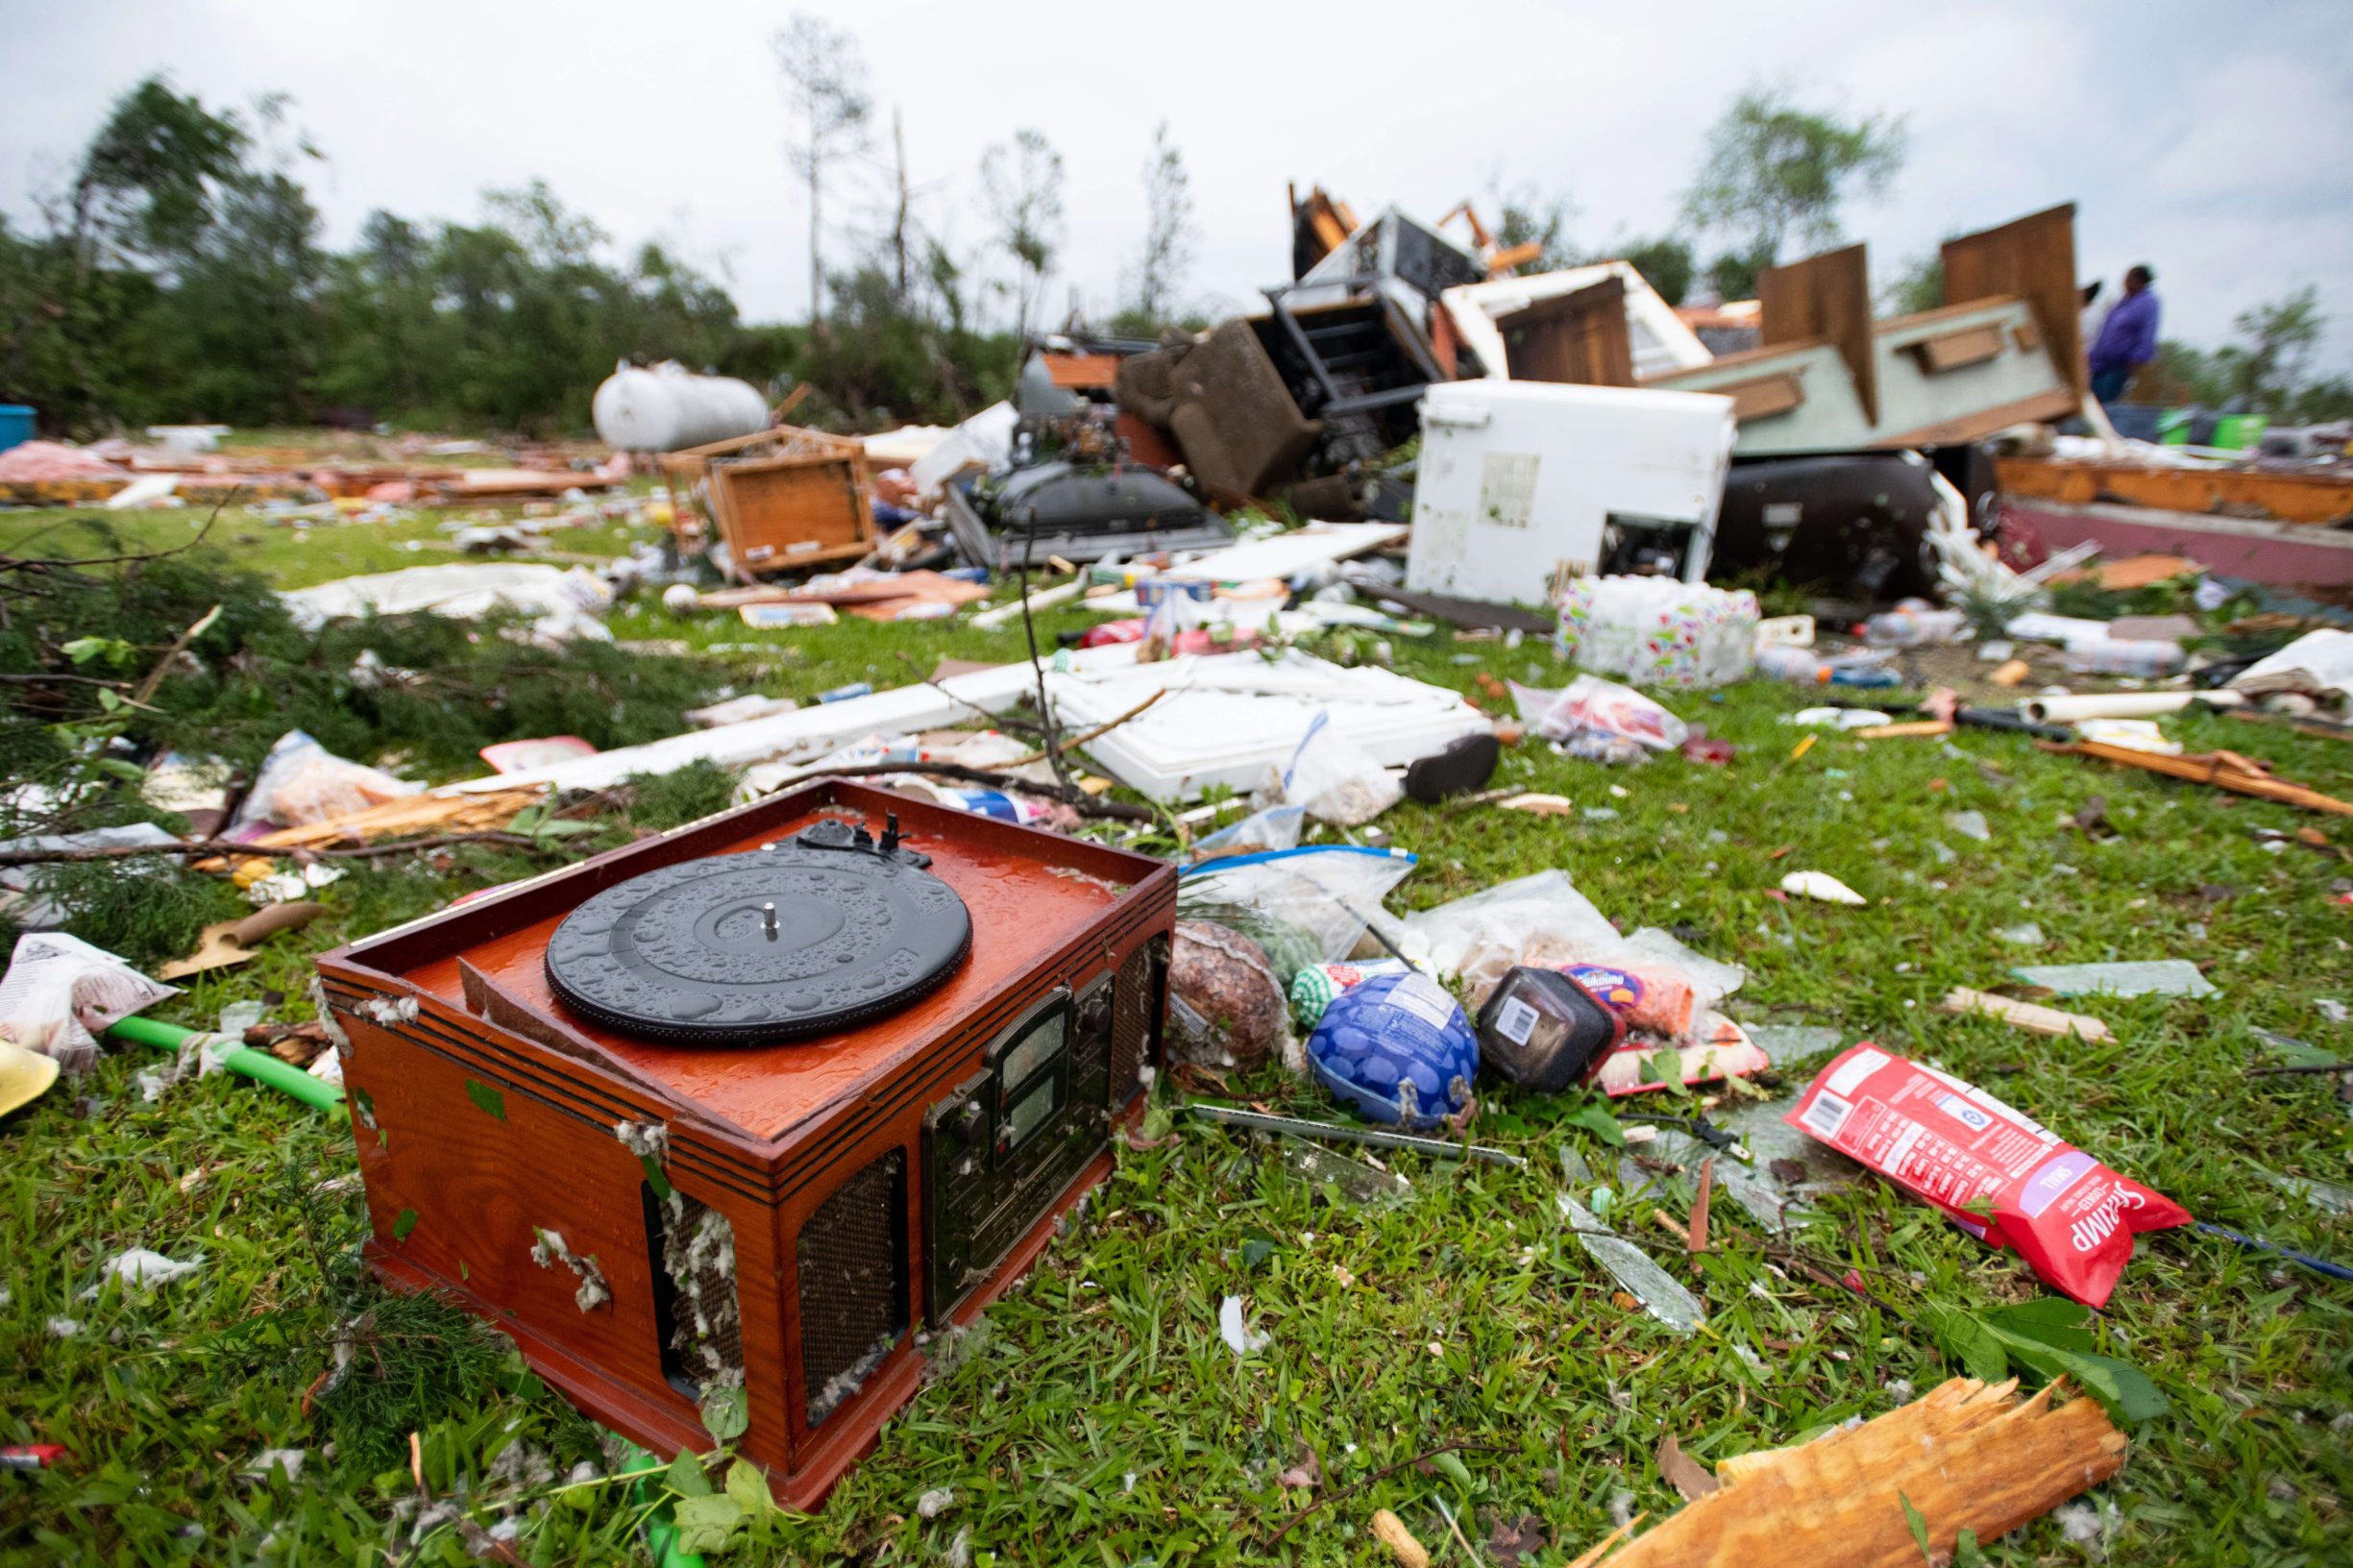 LIVINGSTON, SC - APRIL 13: A record player sits in the yard of storm damaged home April 13, 2020 in Livingston, South Carolina. A string of storms caused more than a dozen deaths across the southern United States.   Sean Rayford/Getty Images/AFP
== FOR NEWSPAPERS, INTERNET, TELCOS & TELEVISION USE ONLY ==